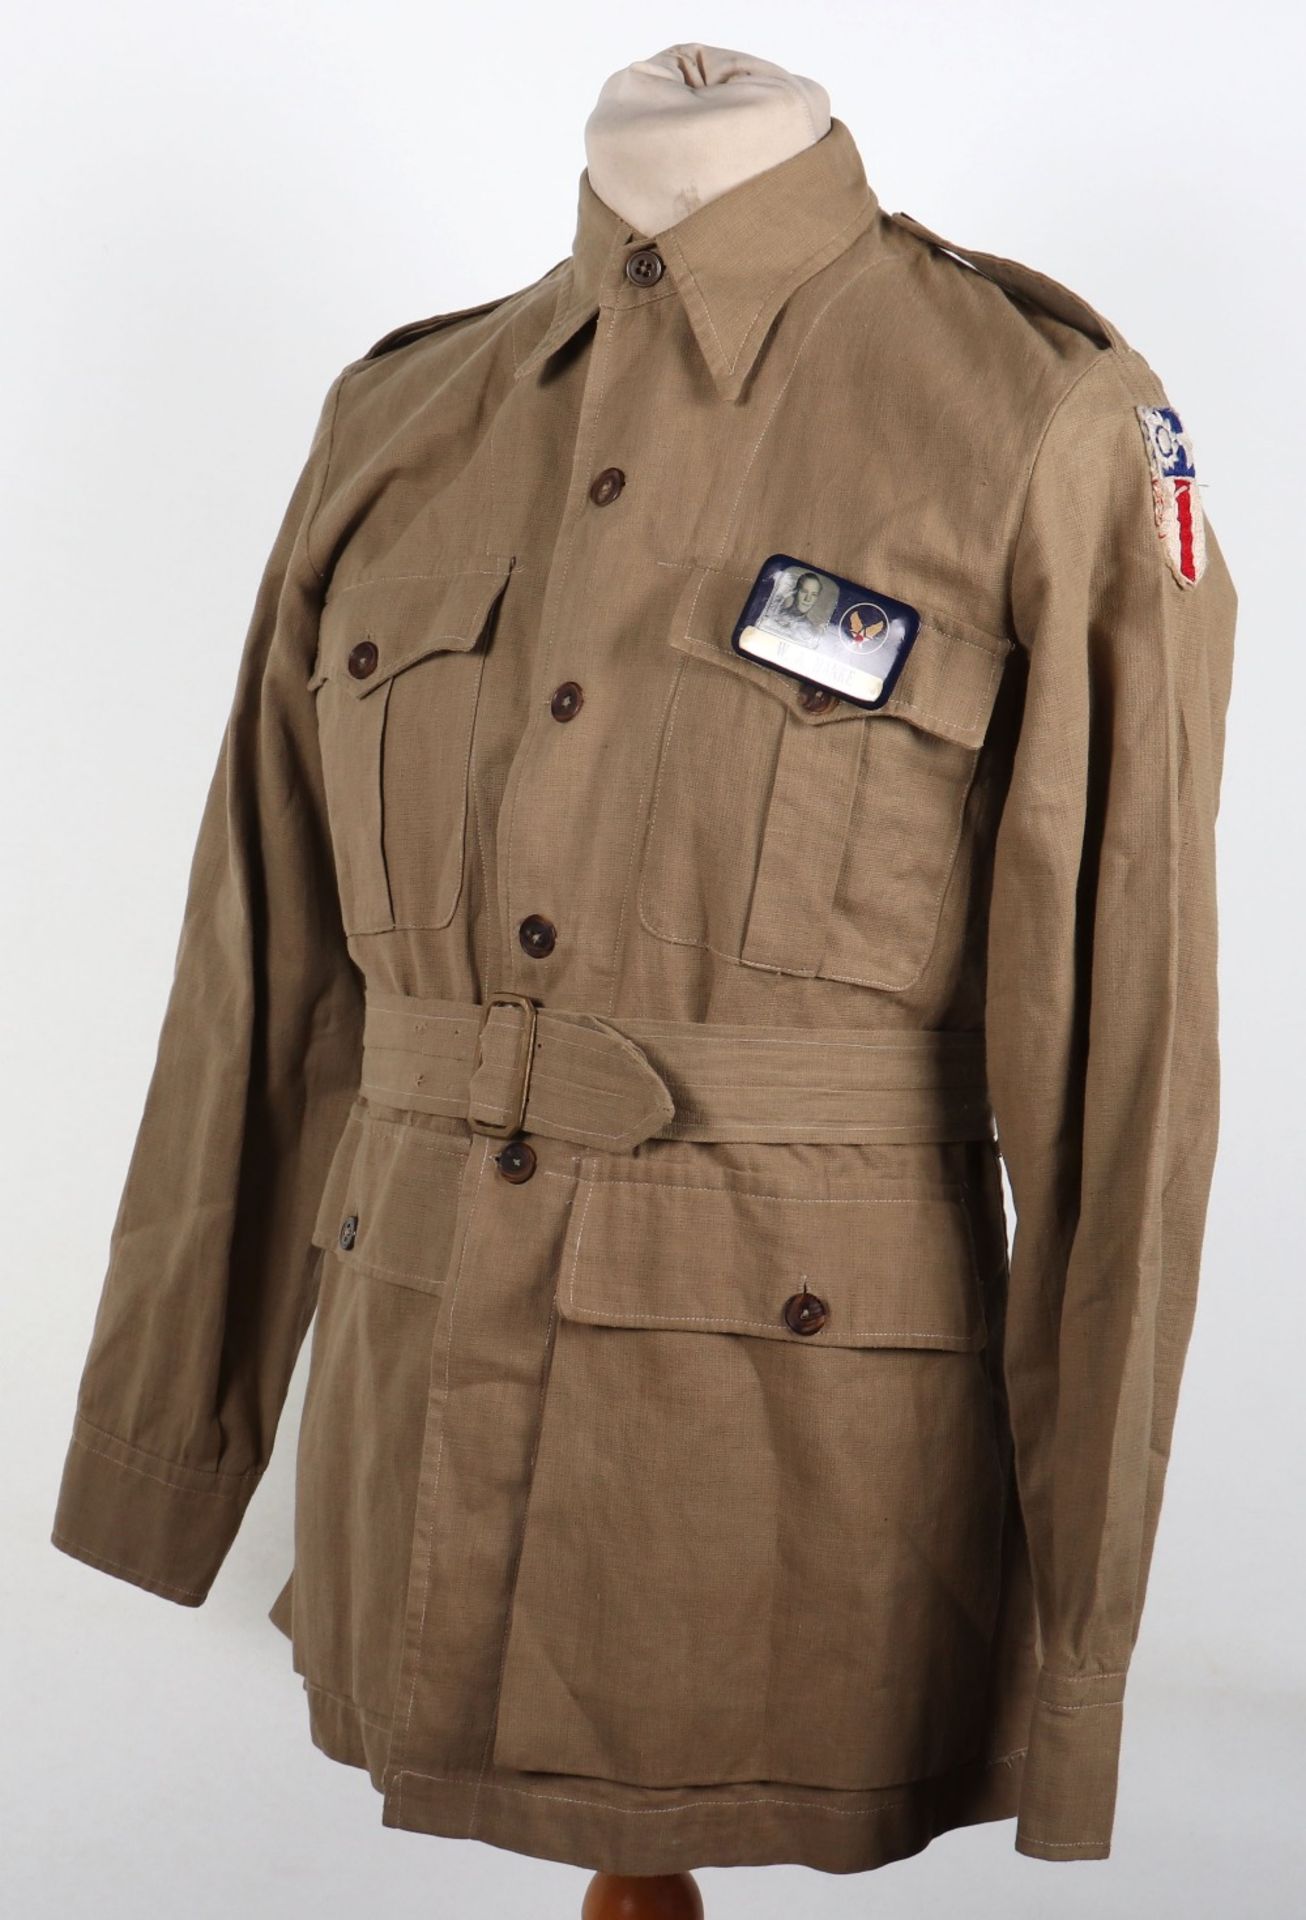 WW2 American C.B.I (China Burma India) Flying Tigers Tunic with Theatre Made Patches - Image 3 of 15